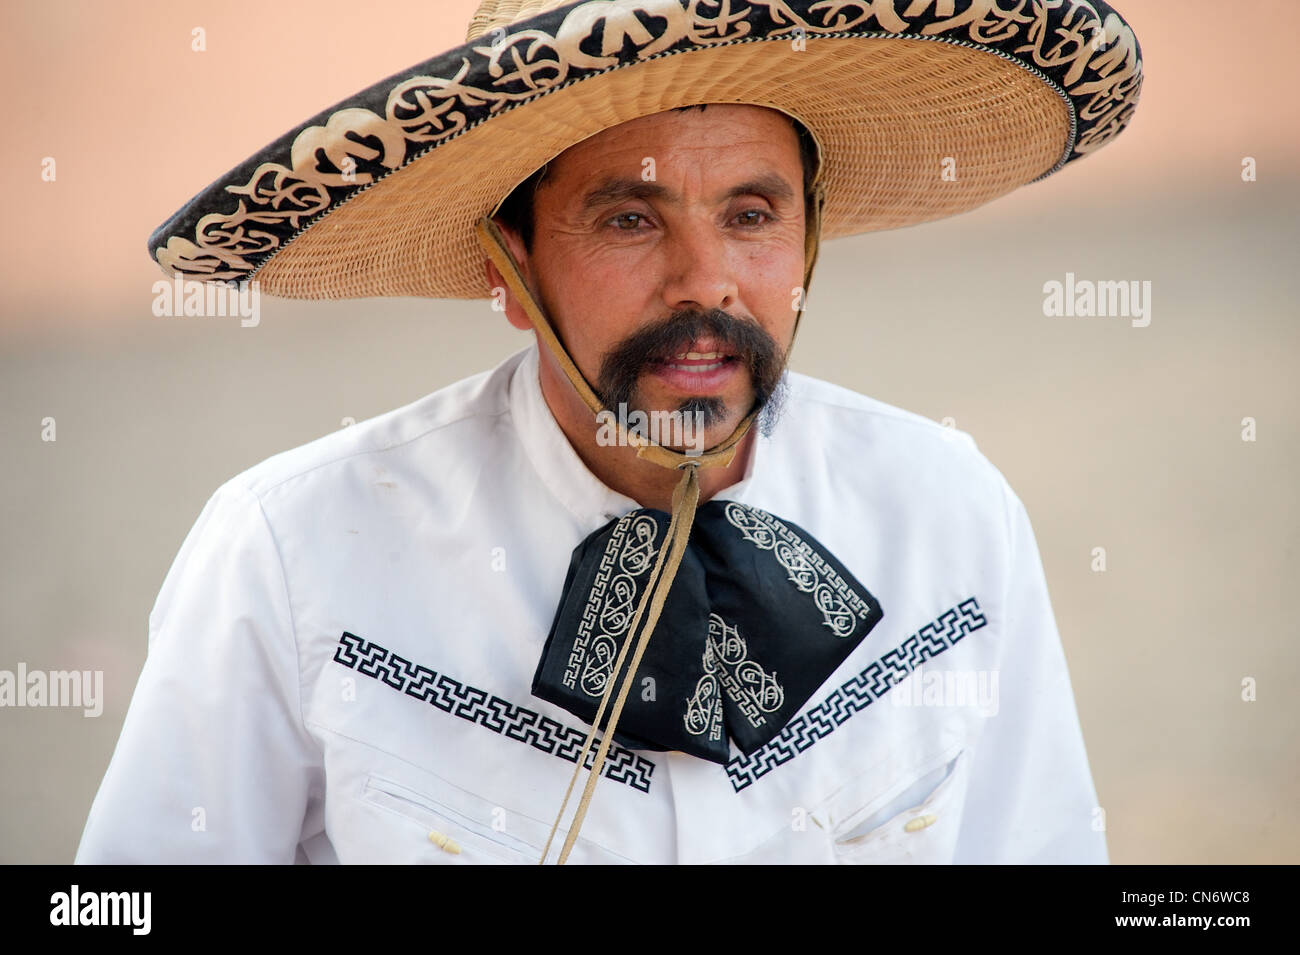 Mexican charro (horseman) with a handlebar moustache, wearing an ornate sombrero and traditional dress, San Antonio, TX, US Stock Photo